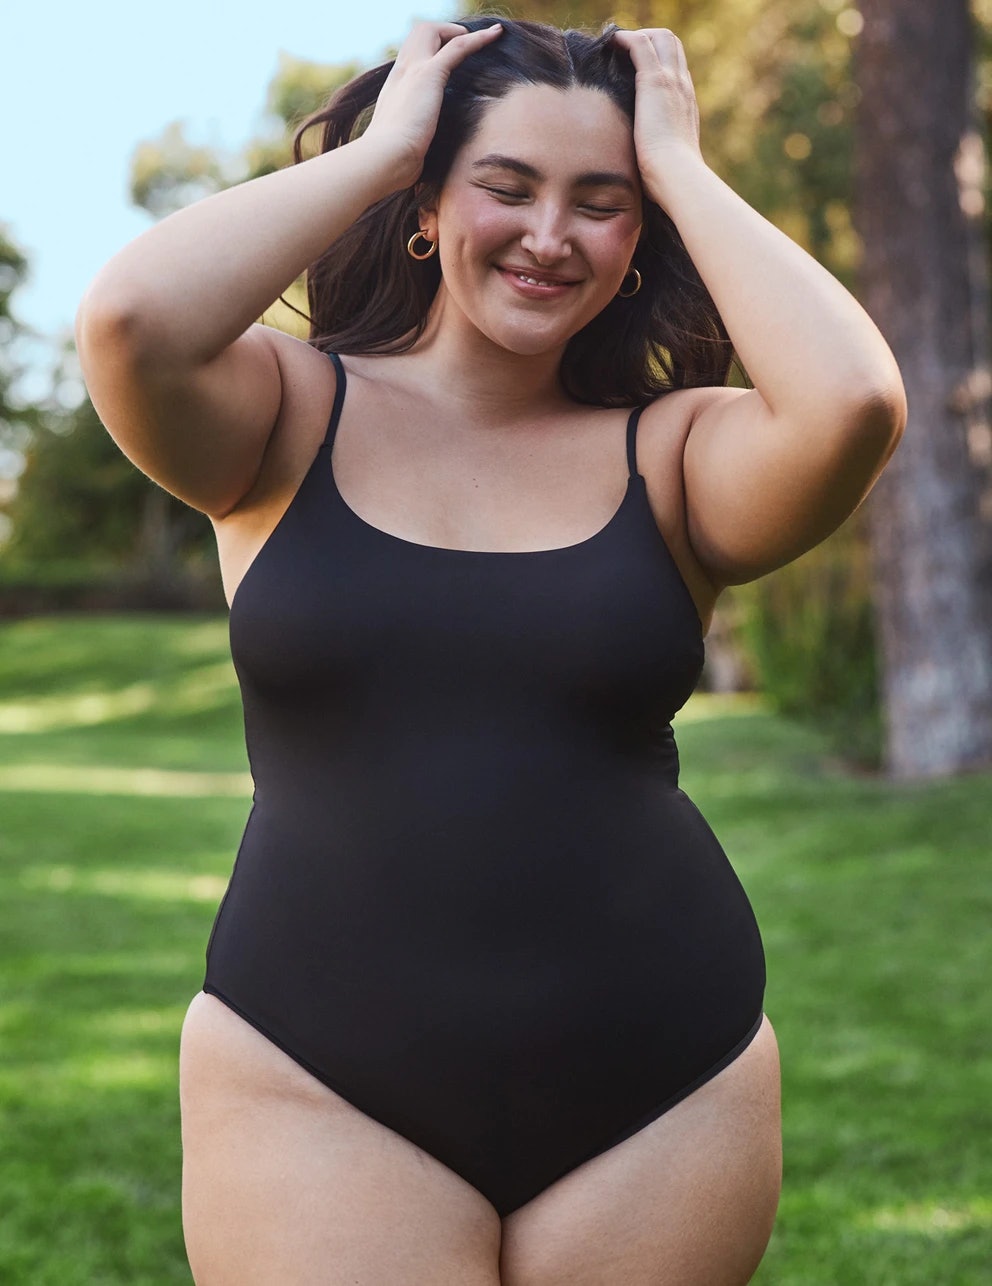 These Period Swimwear Brands Make Swimming During Your Cycle A